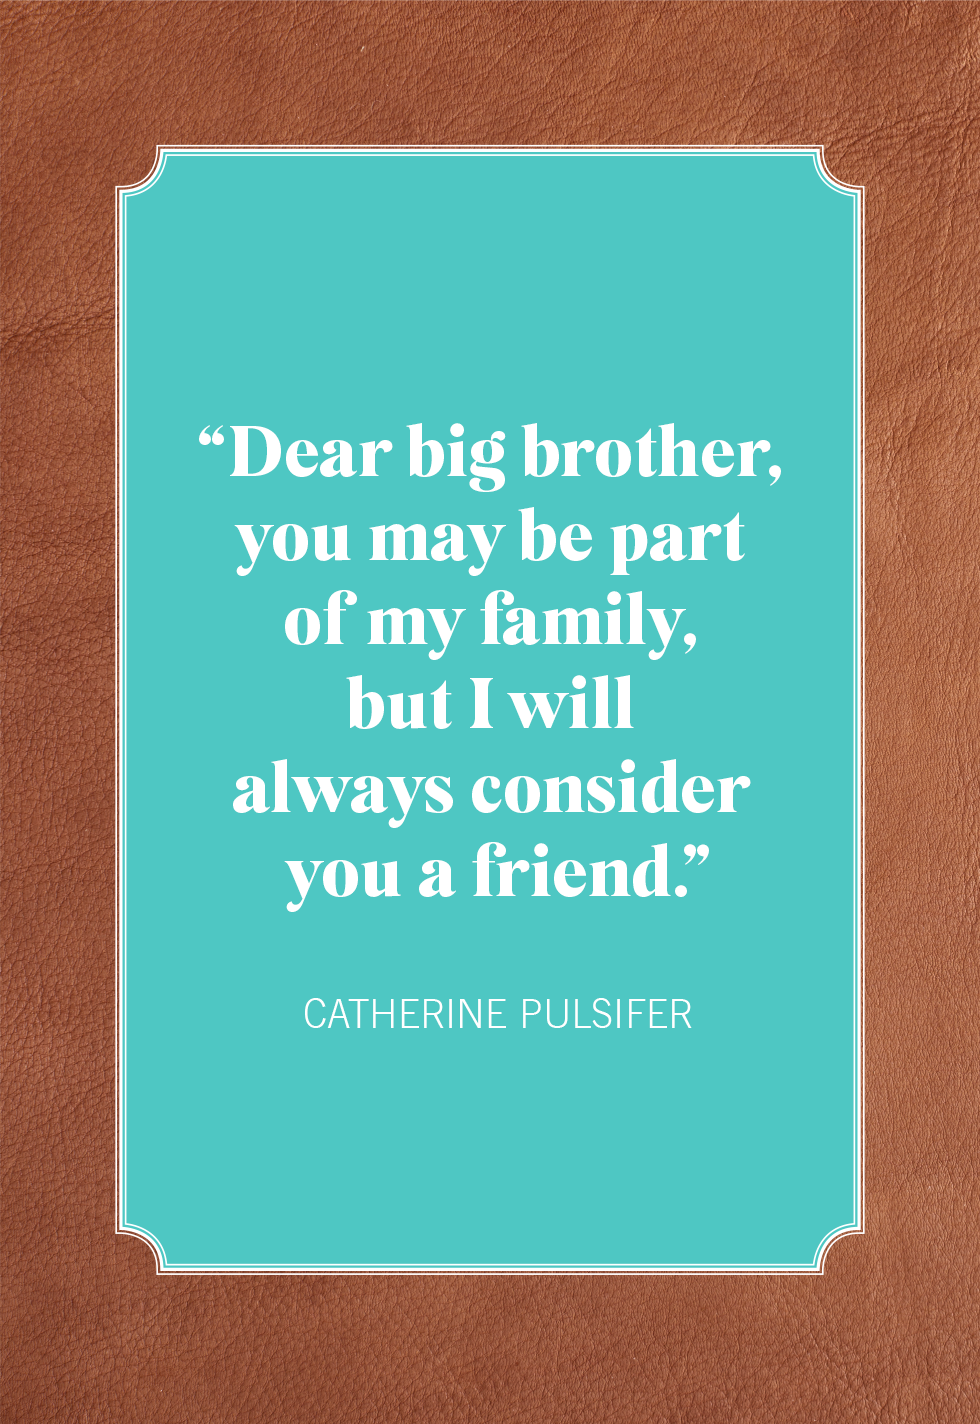 big brother quotes and sayings